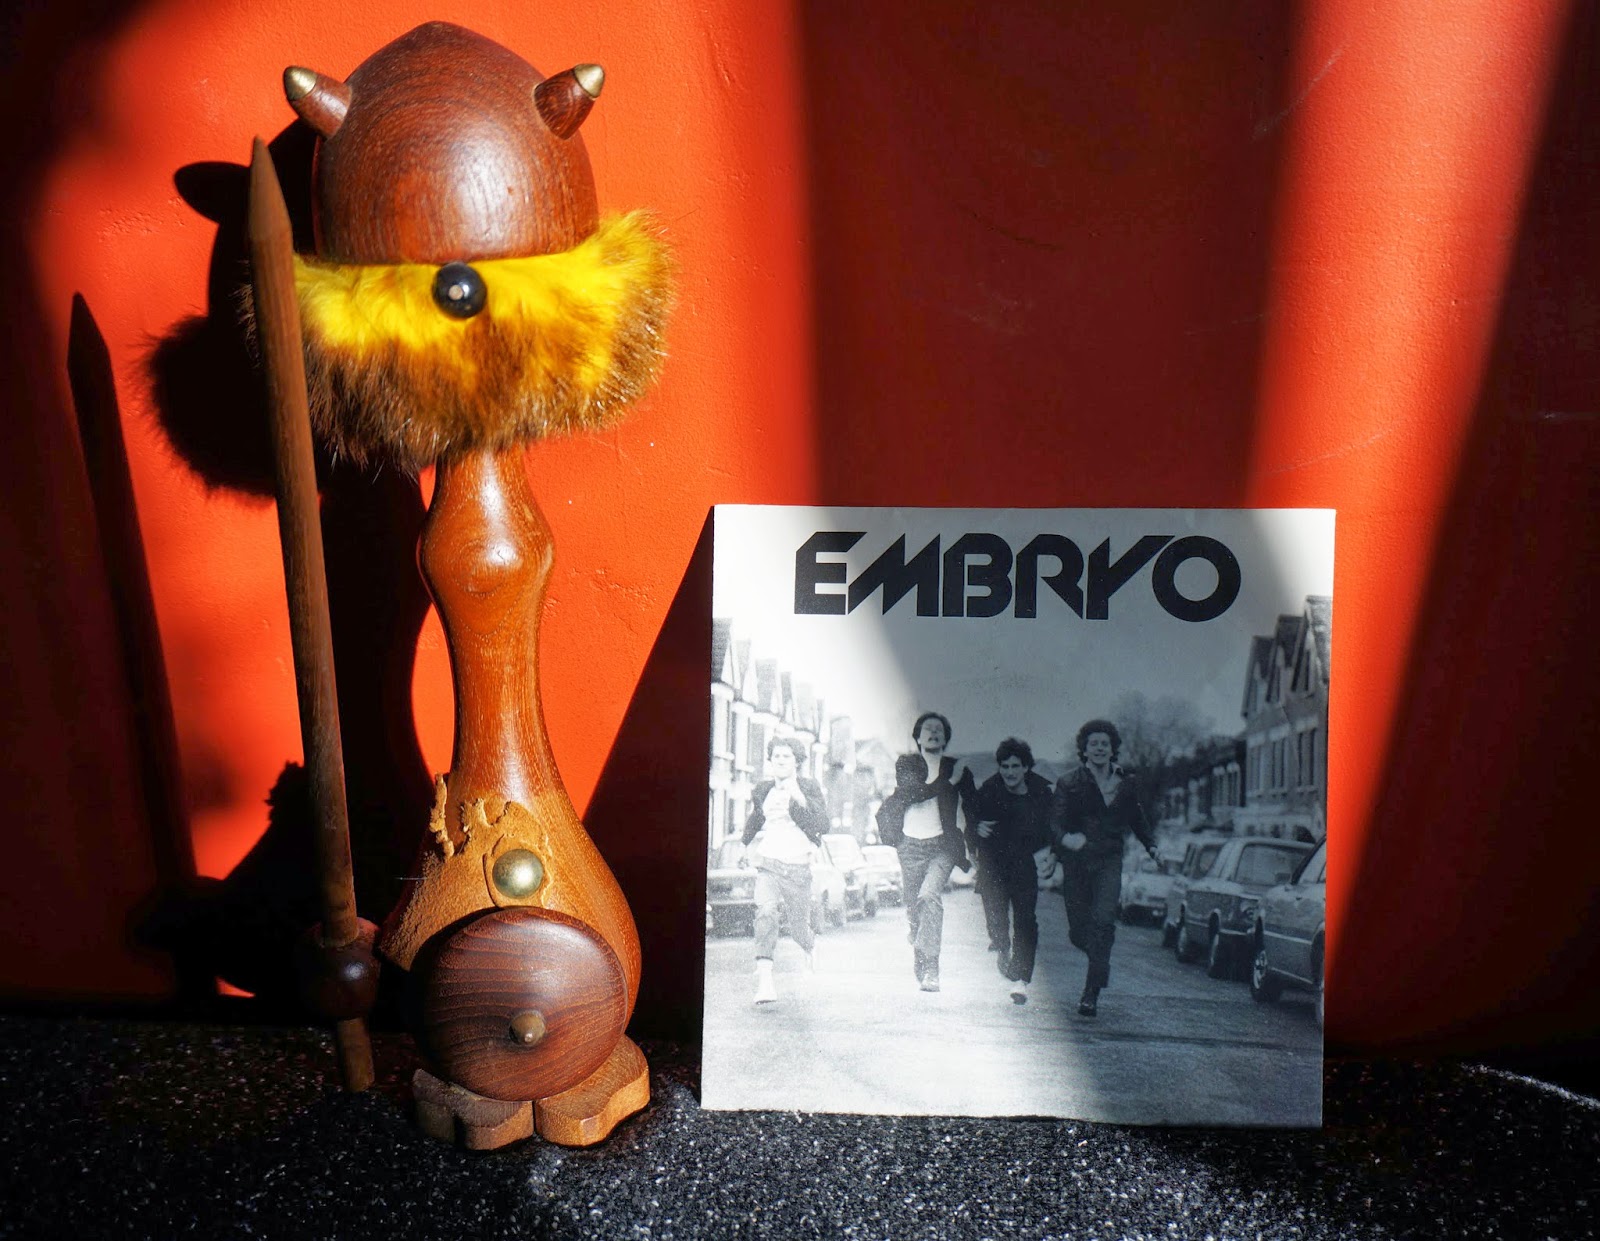 Embryo - You know he did - I'm different - 1980 Rampant records  punk rock kbd